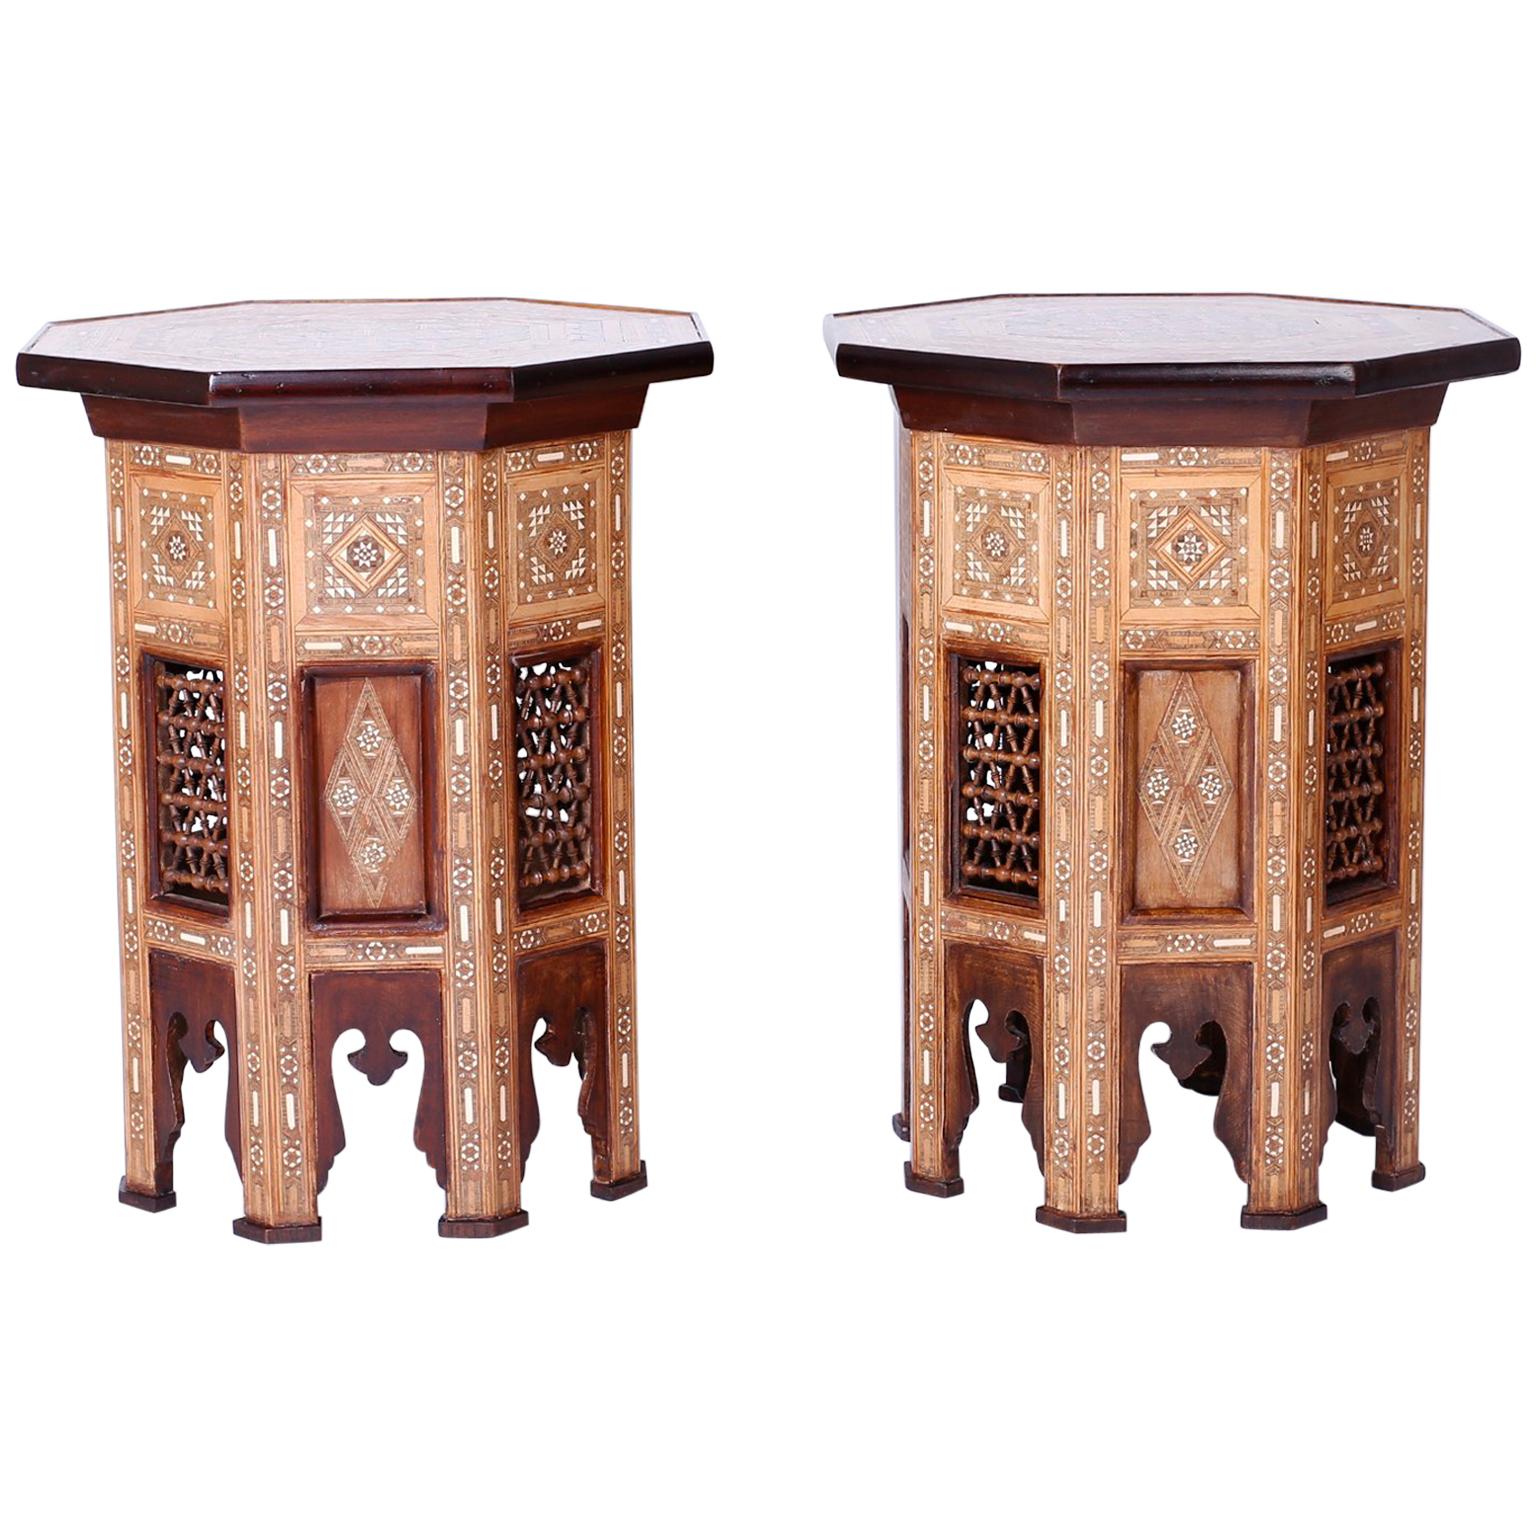 Pair of Antique Inlaid Syrian Side Tables